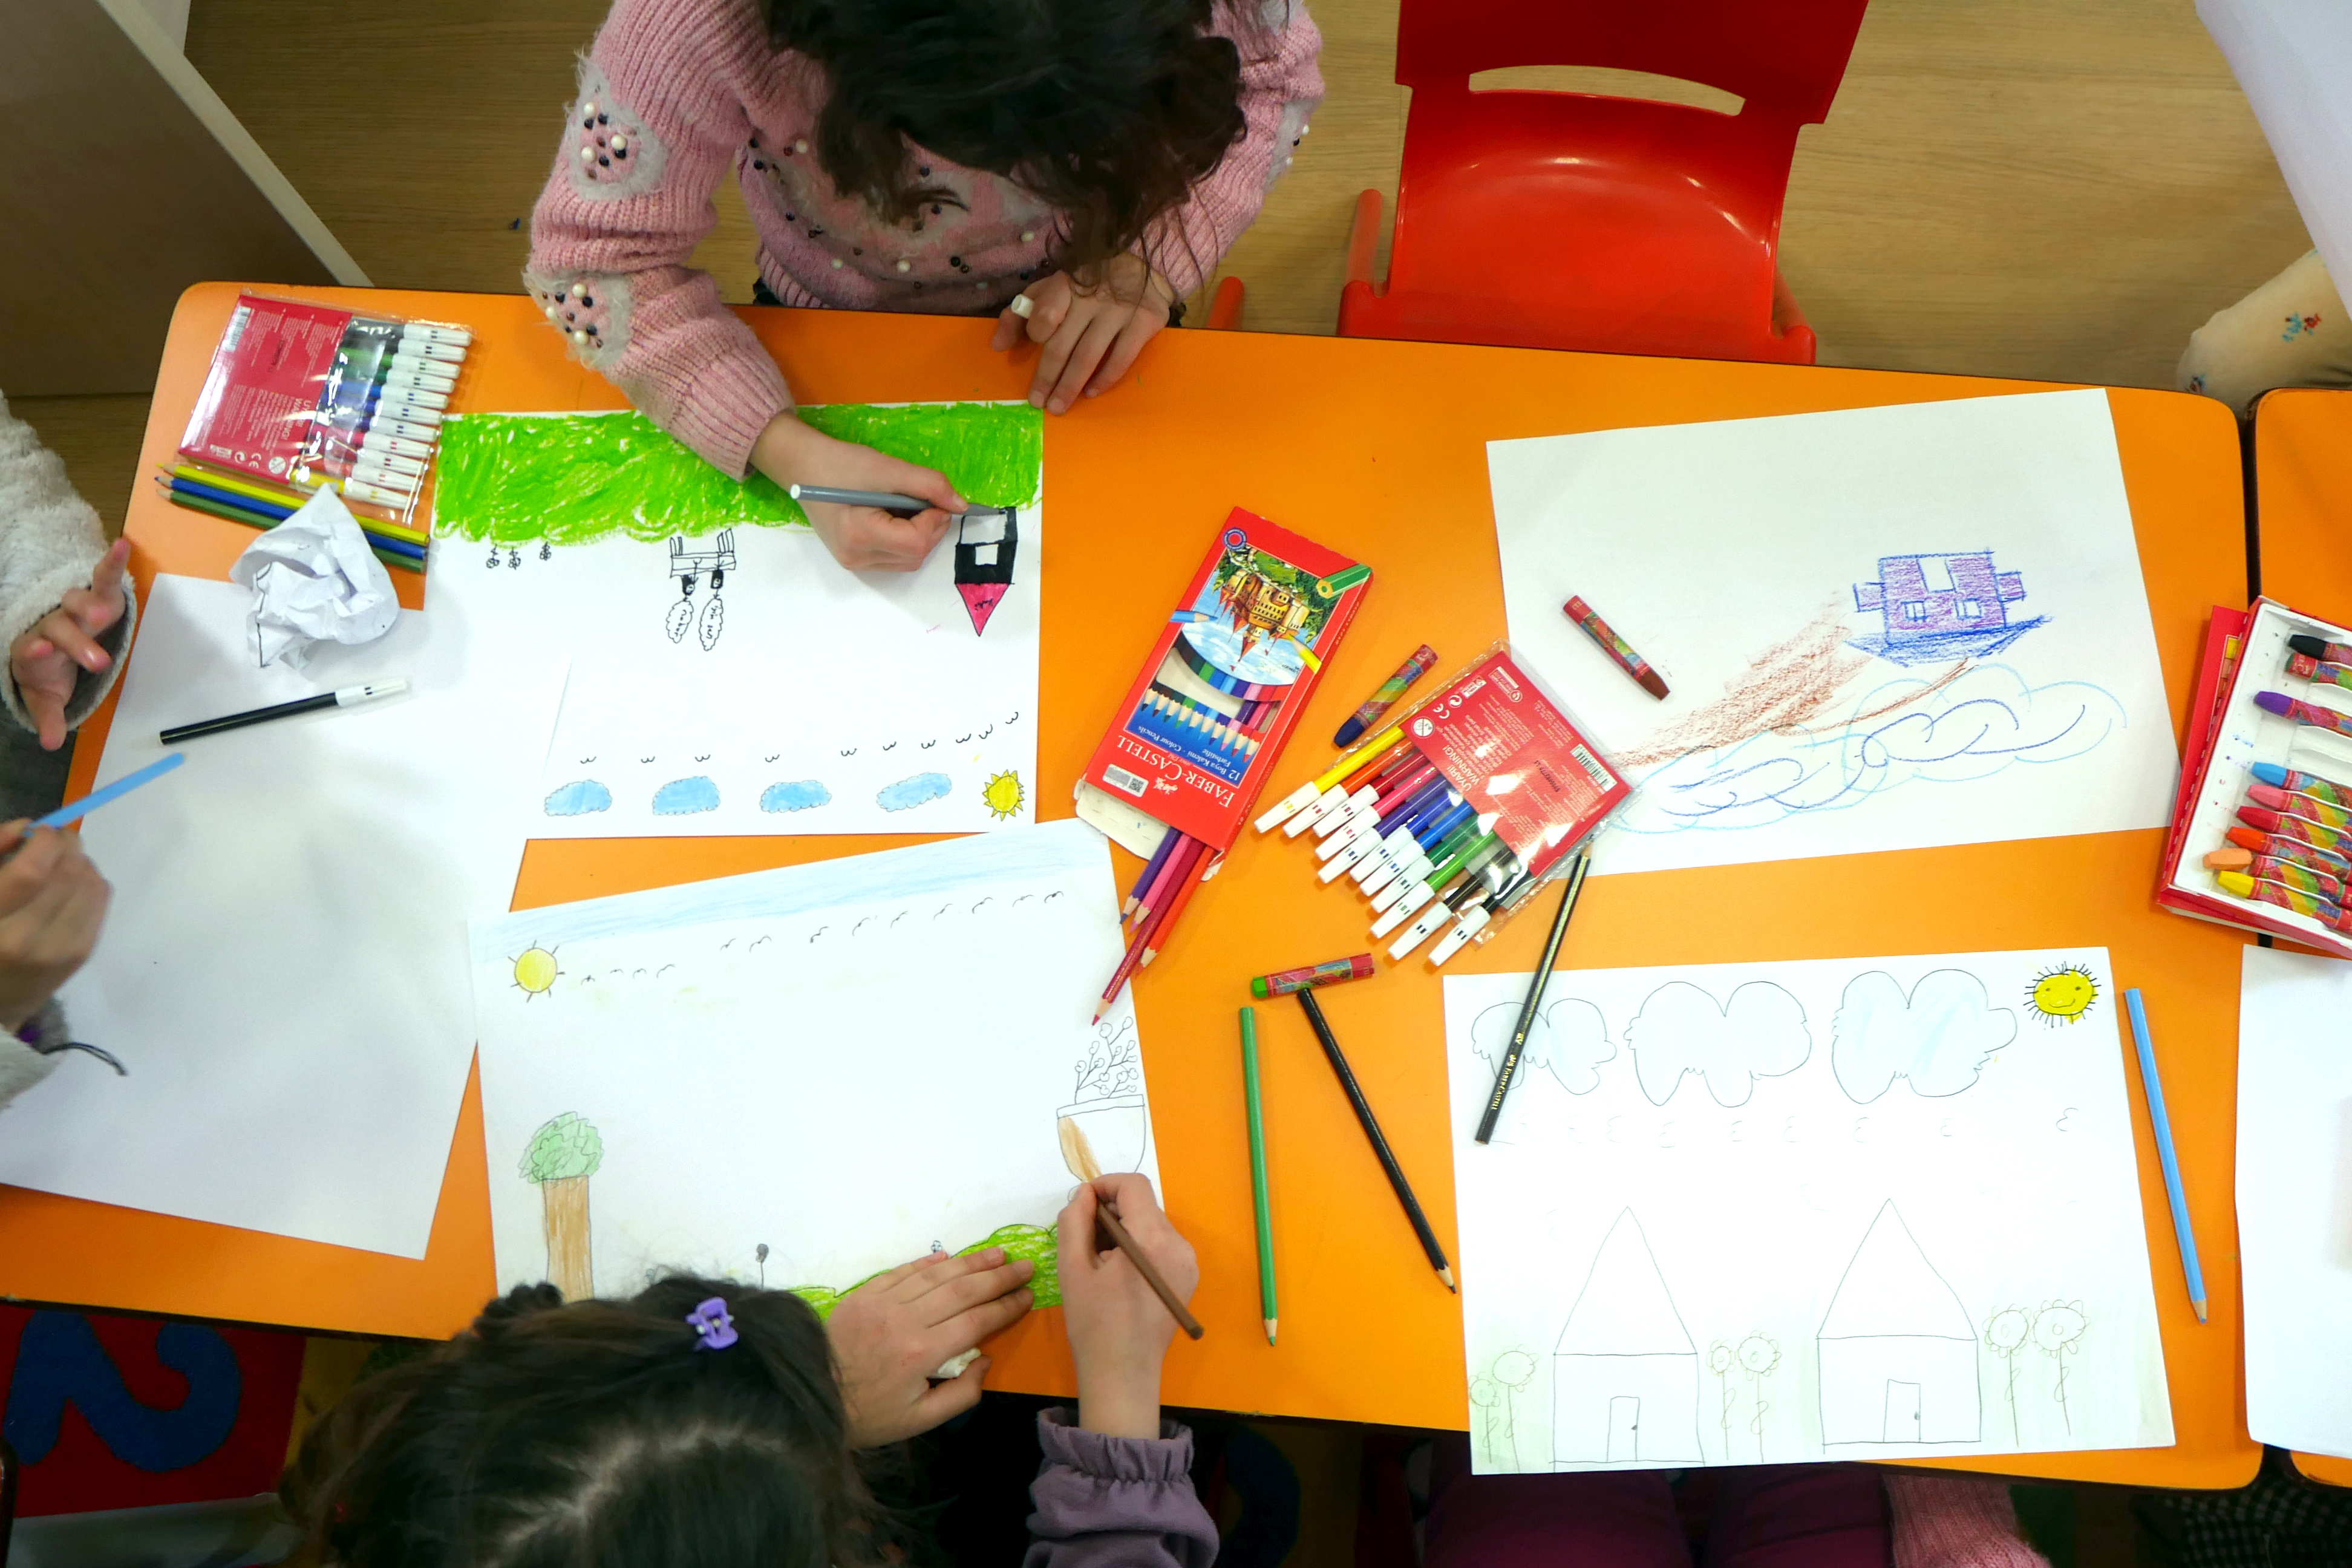 Turkey. Refugee children draw what they imagine Syria to look like